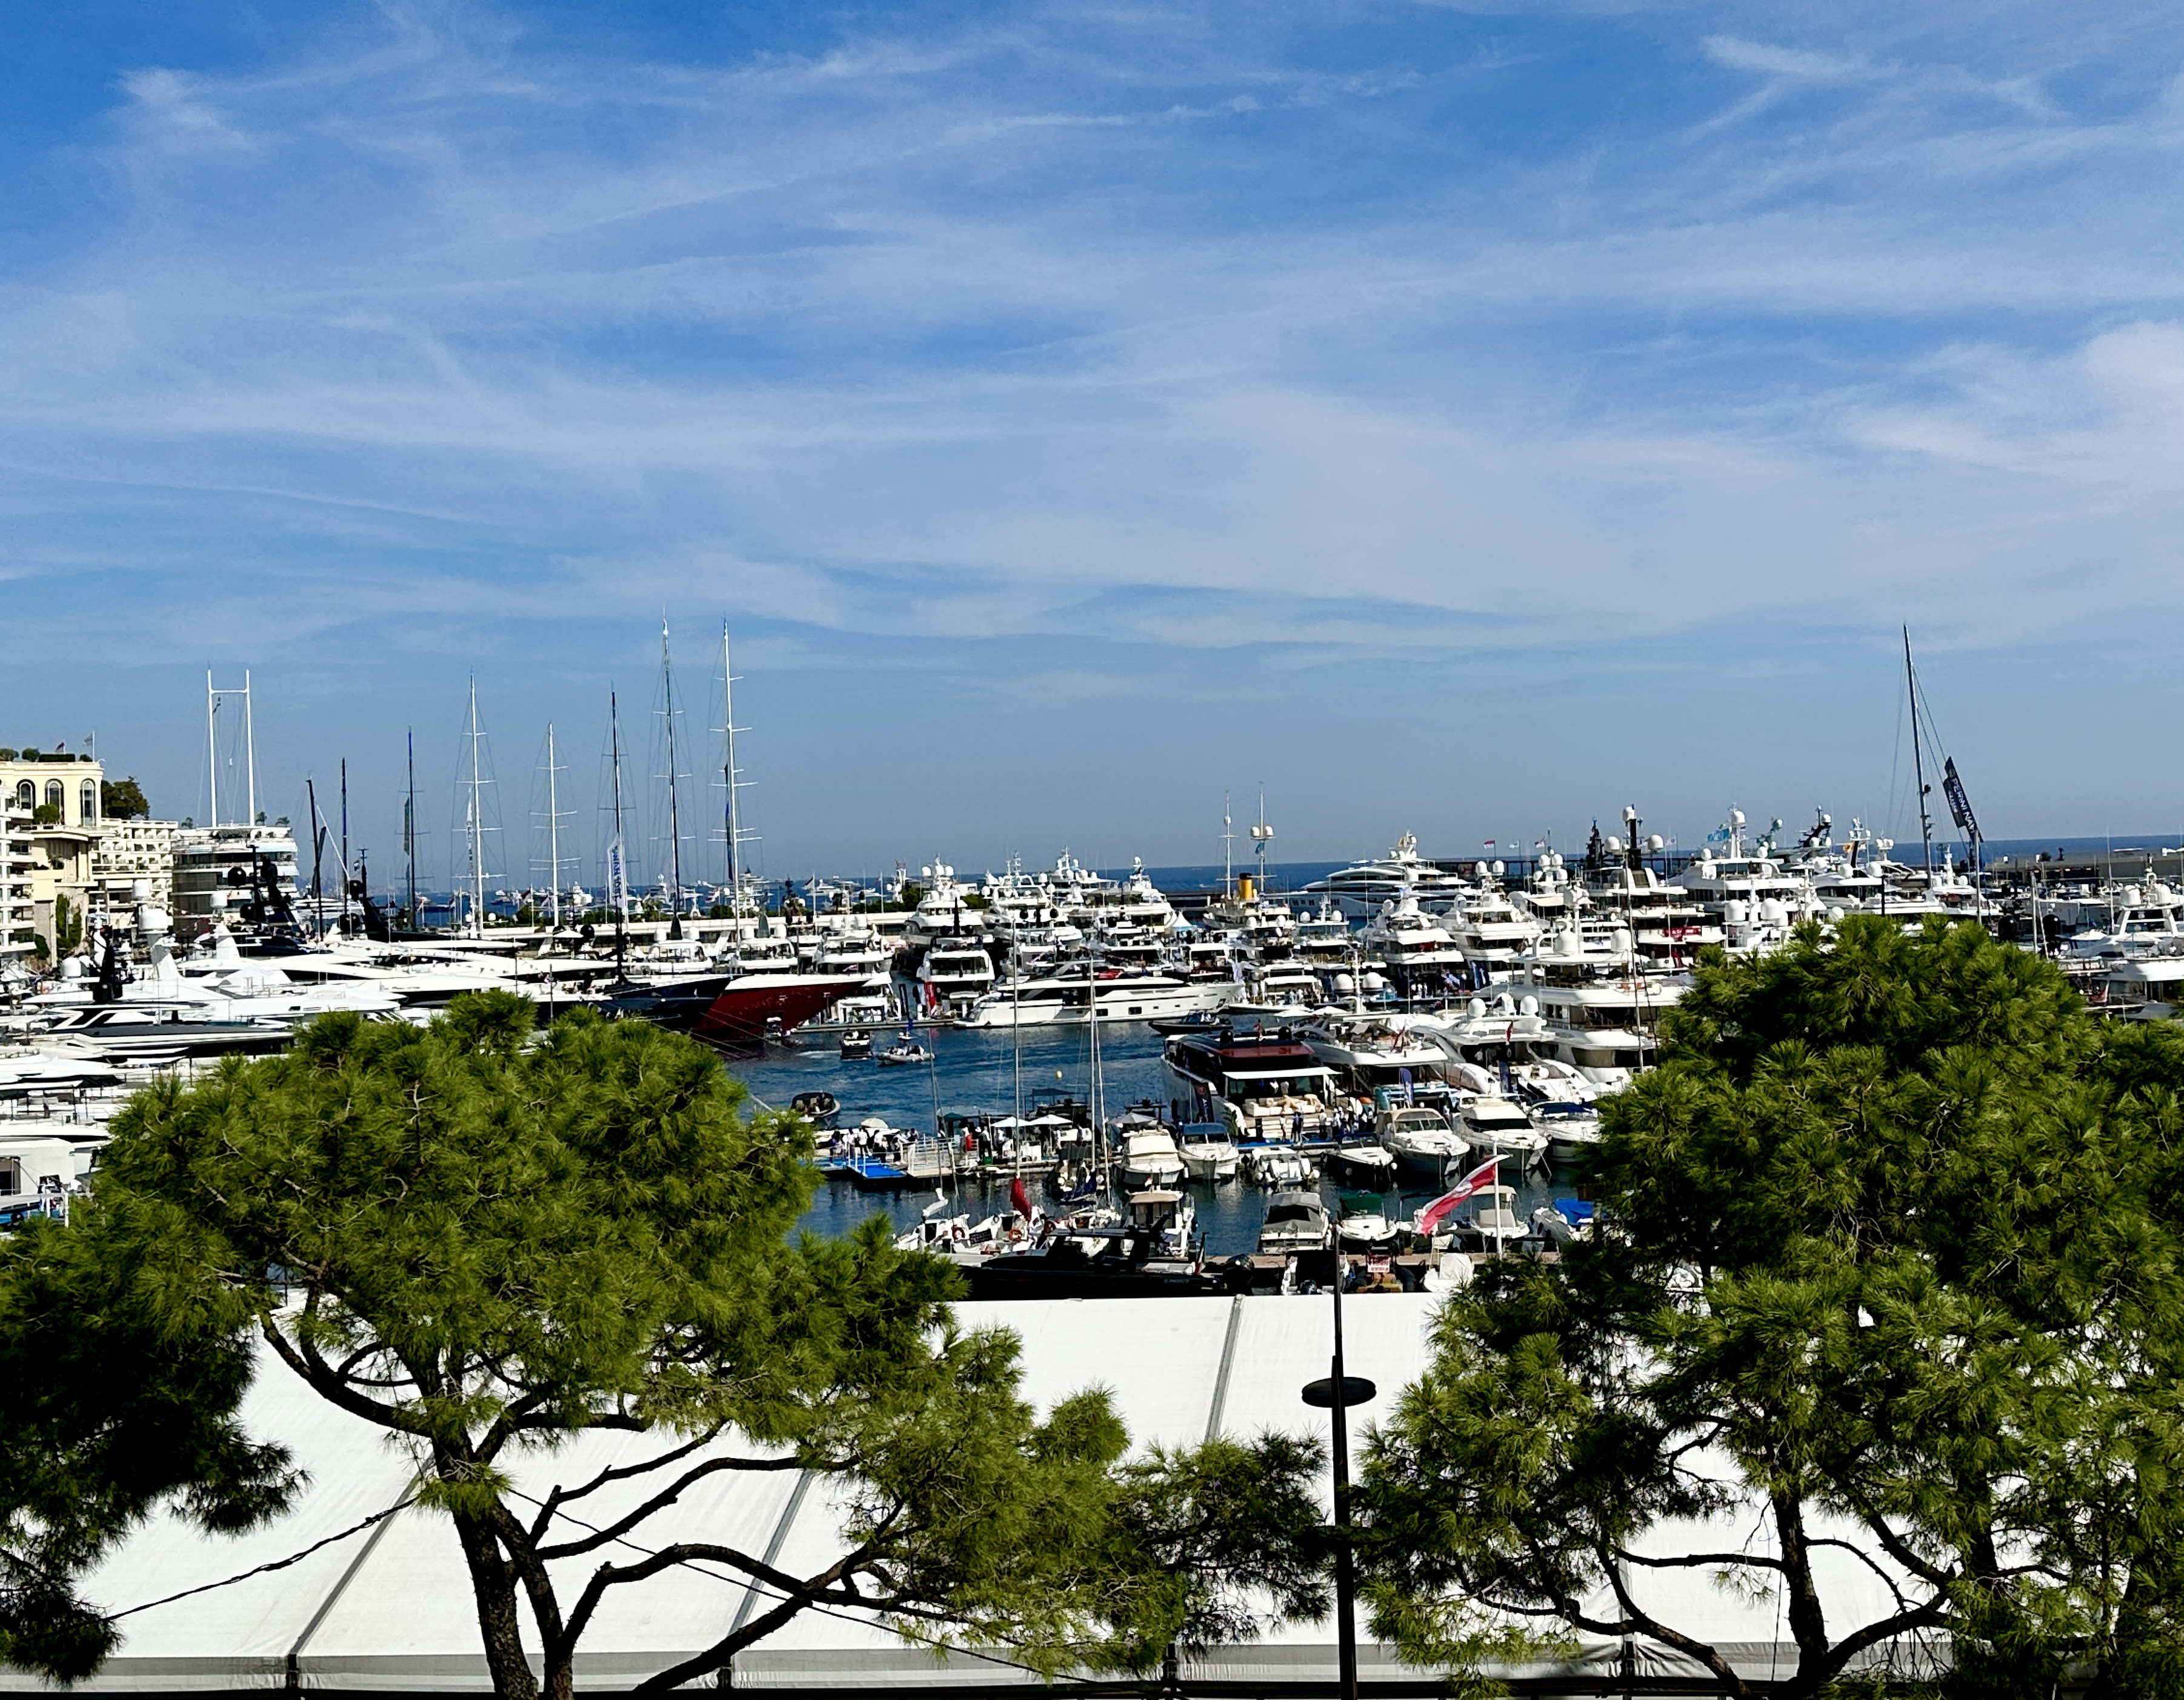 Highlights of the Monaco Yacht Show 2023 - PrivatSea offices overlooking MYS 2023